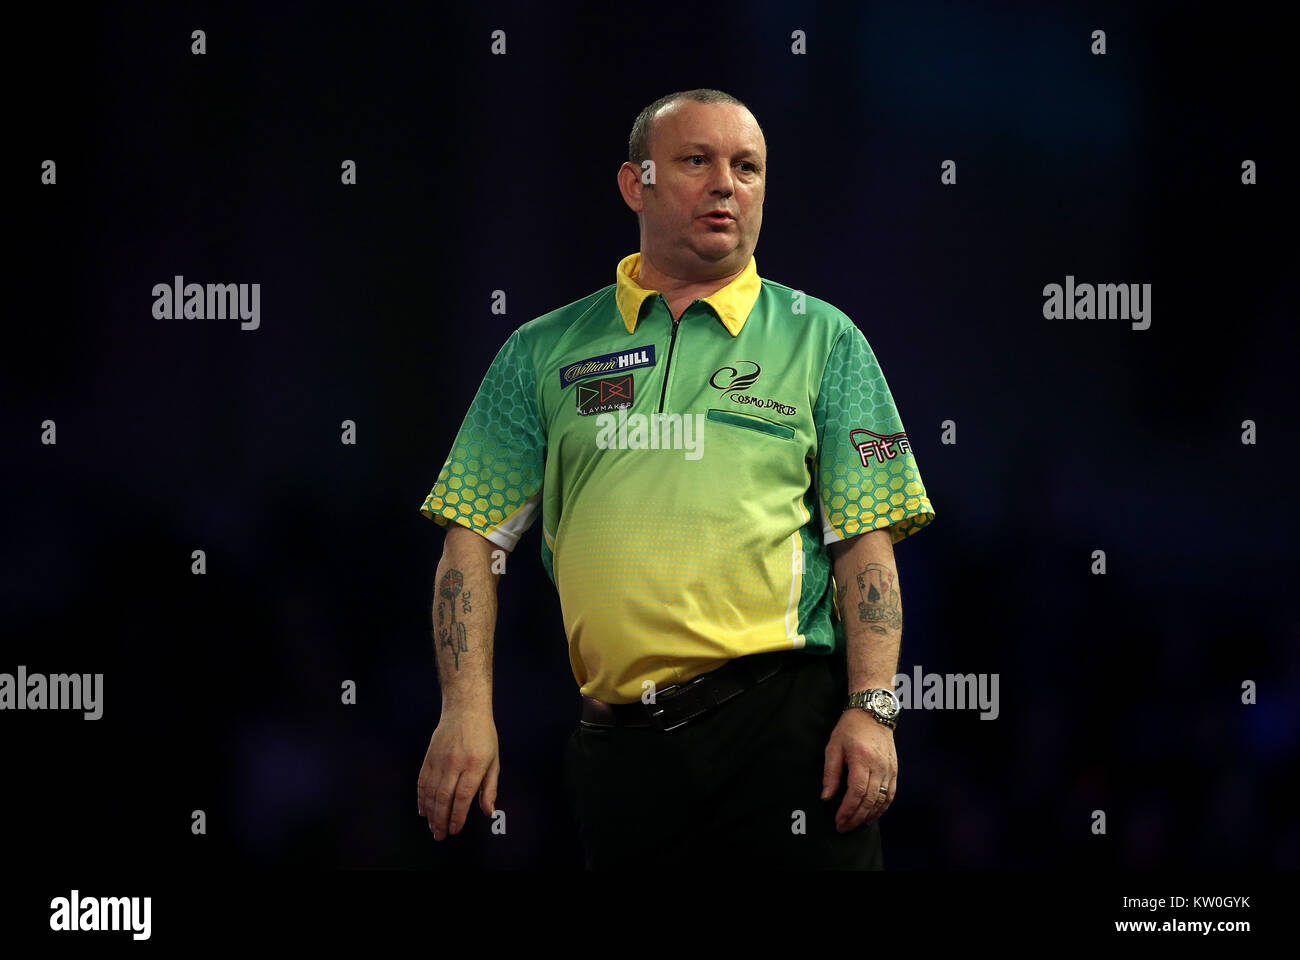 Darren Webster reacts during day twelve of the William Hill World Darts Championship at Alexandra Palace, London. PRESS ASSOCIATION Photo. Picture date: Thursday December 28, 2017. See PA story DARTS World. Photo credit should read: Steven Paston/PA Wire. RESTRICTIONS: Use subject to restrictions. Editorial use only. No commercial use. Stock Photo